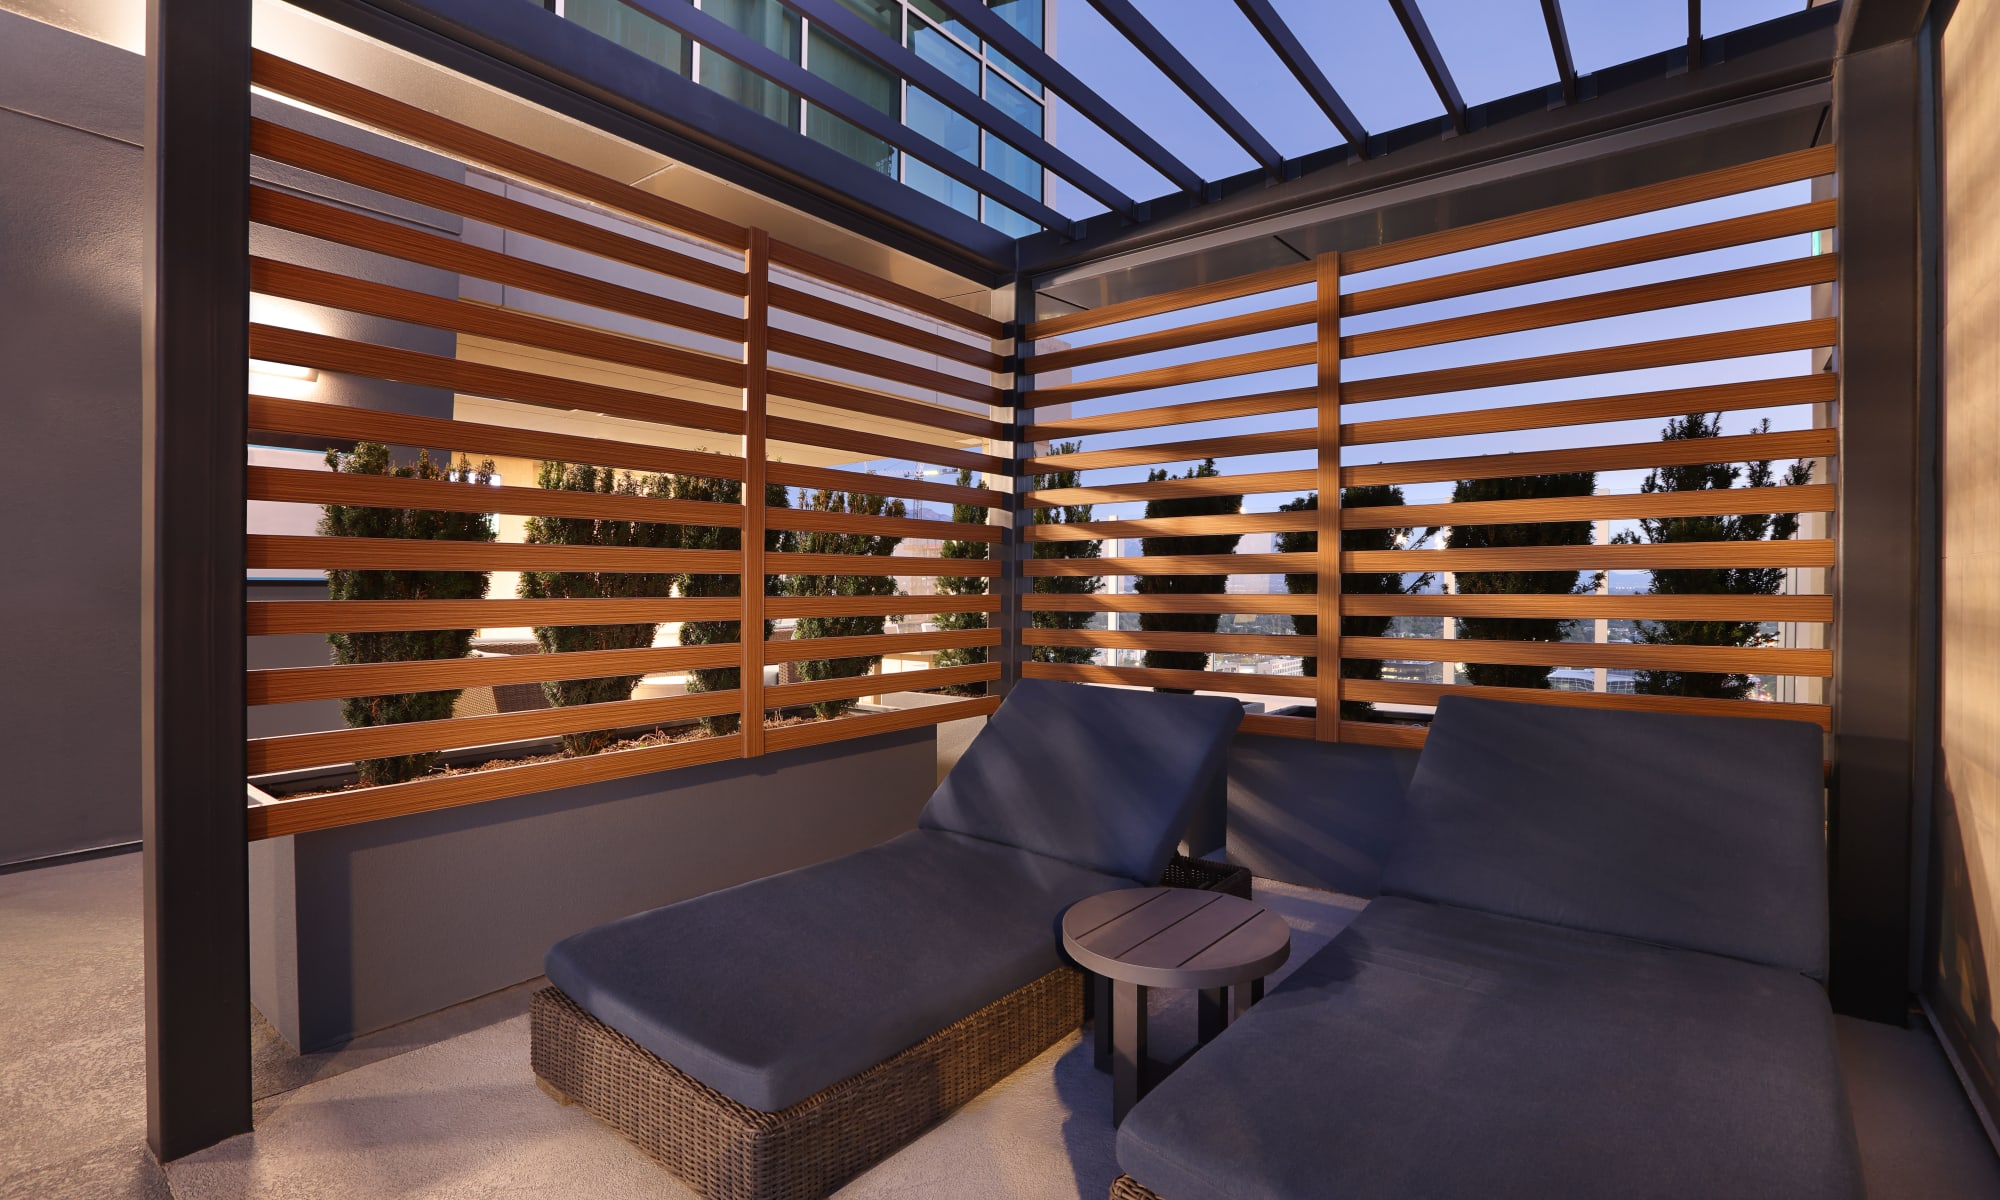 Pool cabana with navy cushions at Luxury high-rise community of Liberty SKY in Salt Lake City, Utah 